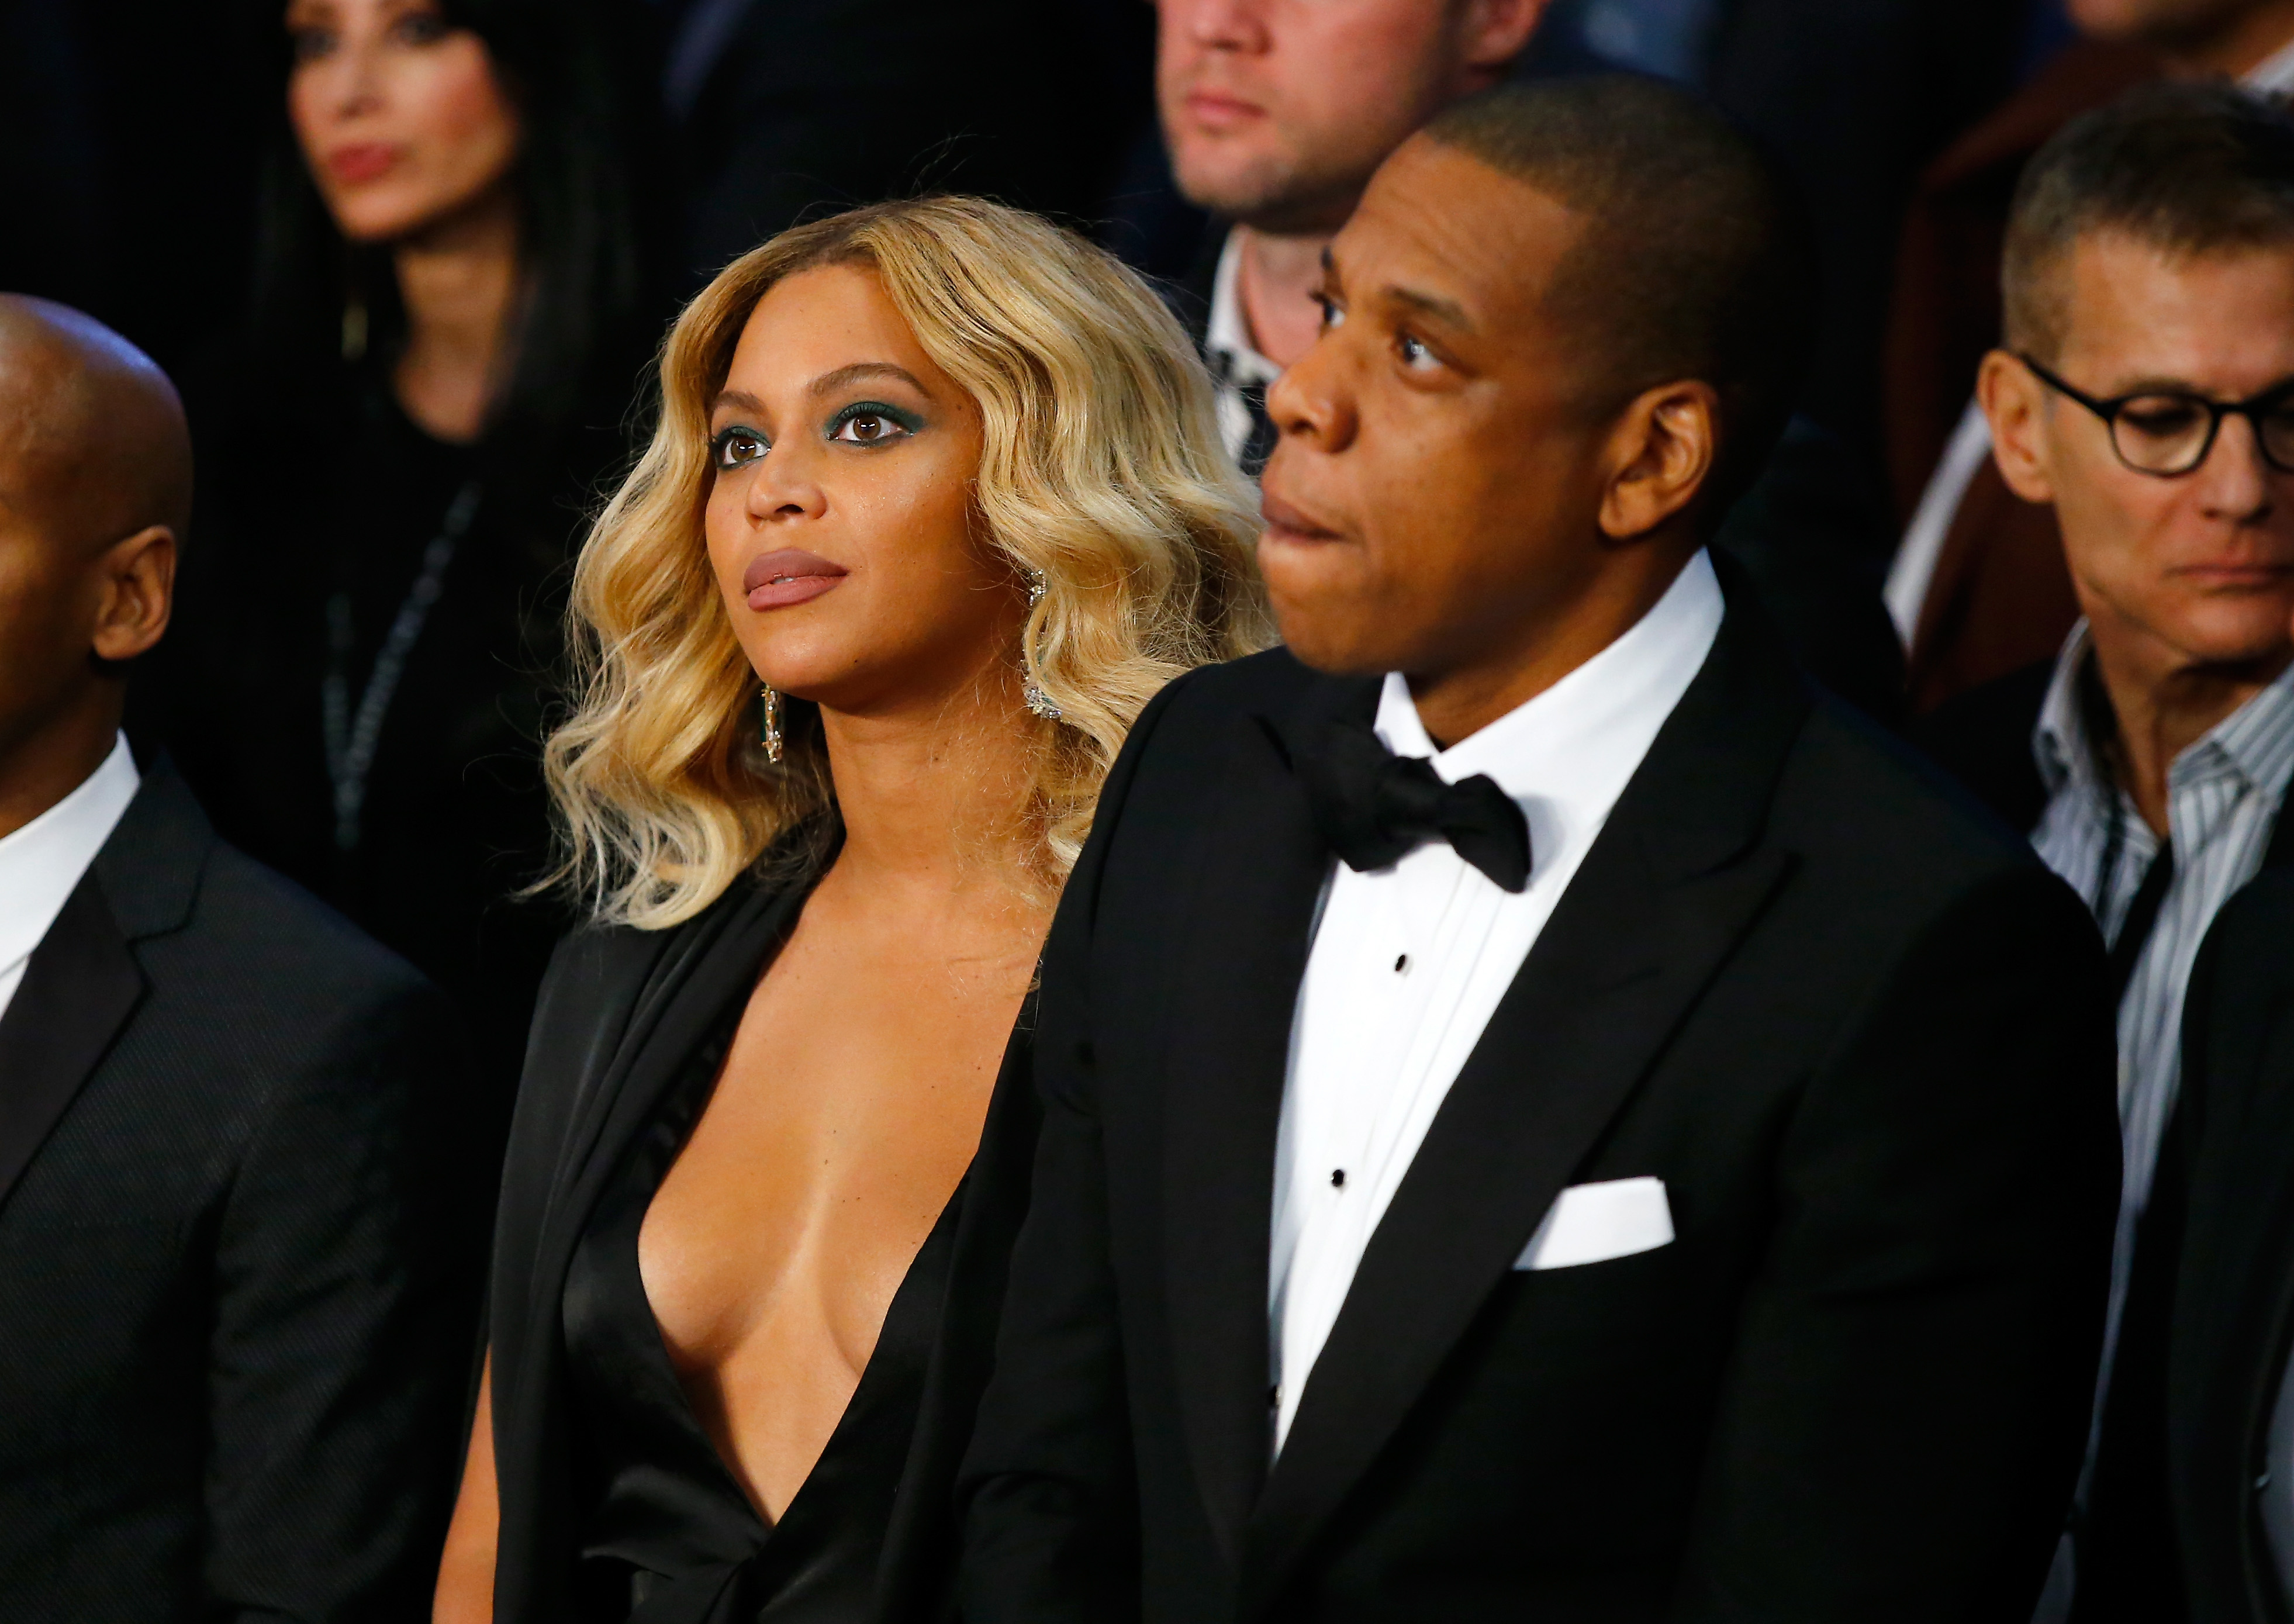 Beyonce Knowles and Jay-Z look on before Miguel Cotto takes on Canelo Alvarez in their middleweight fight at the Mandalay Bay Events Center on November 21, 2015 in Las Vegas, Nevada. (Al Bello—Getty Images)